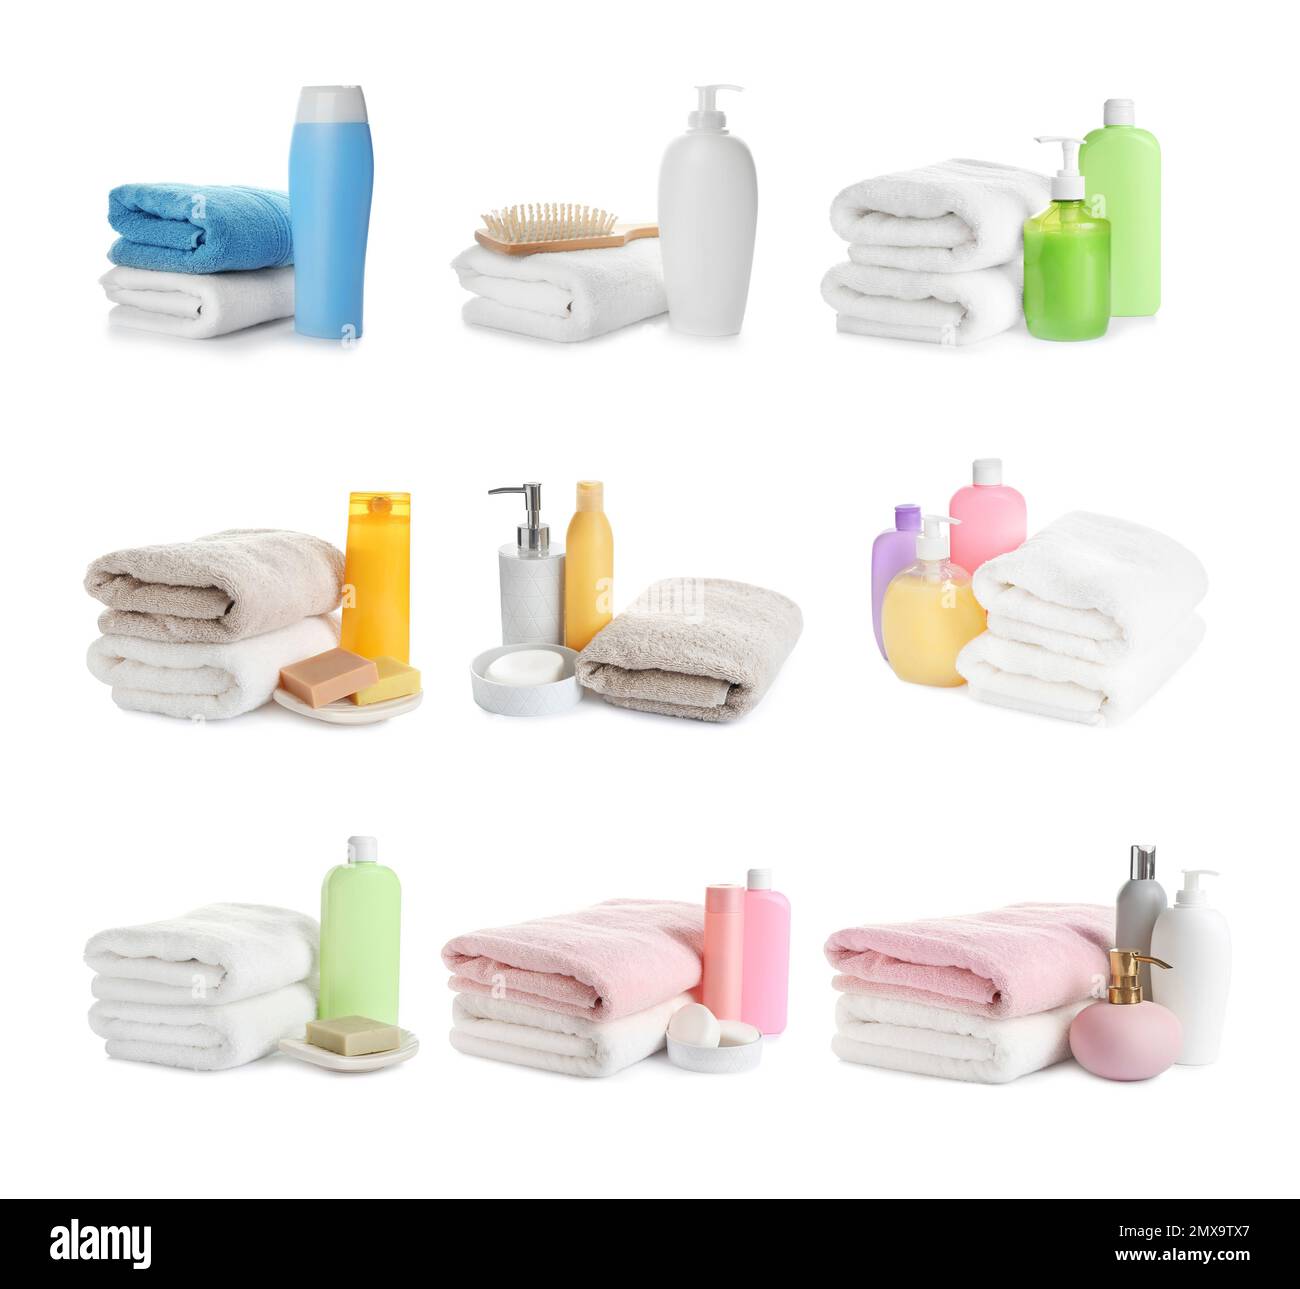 Set of folded soft terry towels and toiletries on white background Stock Photo